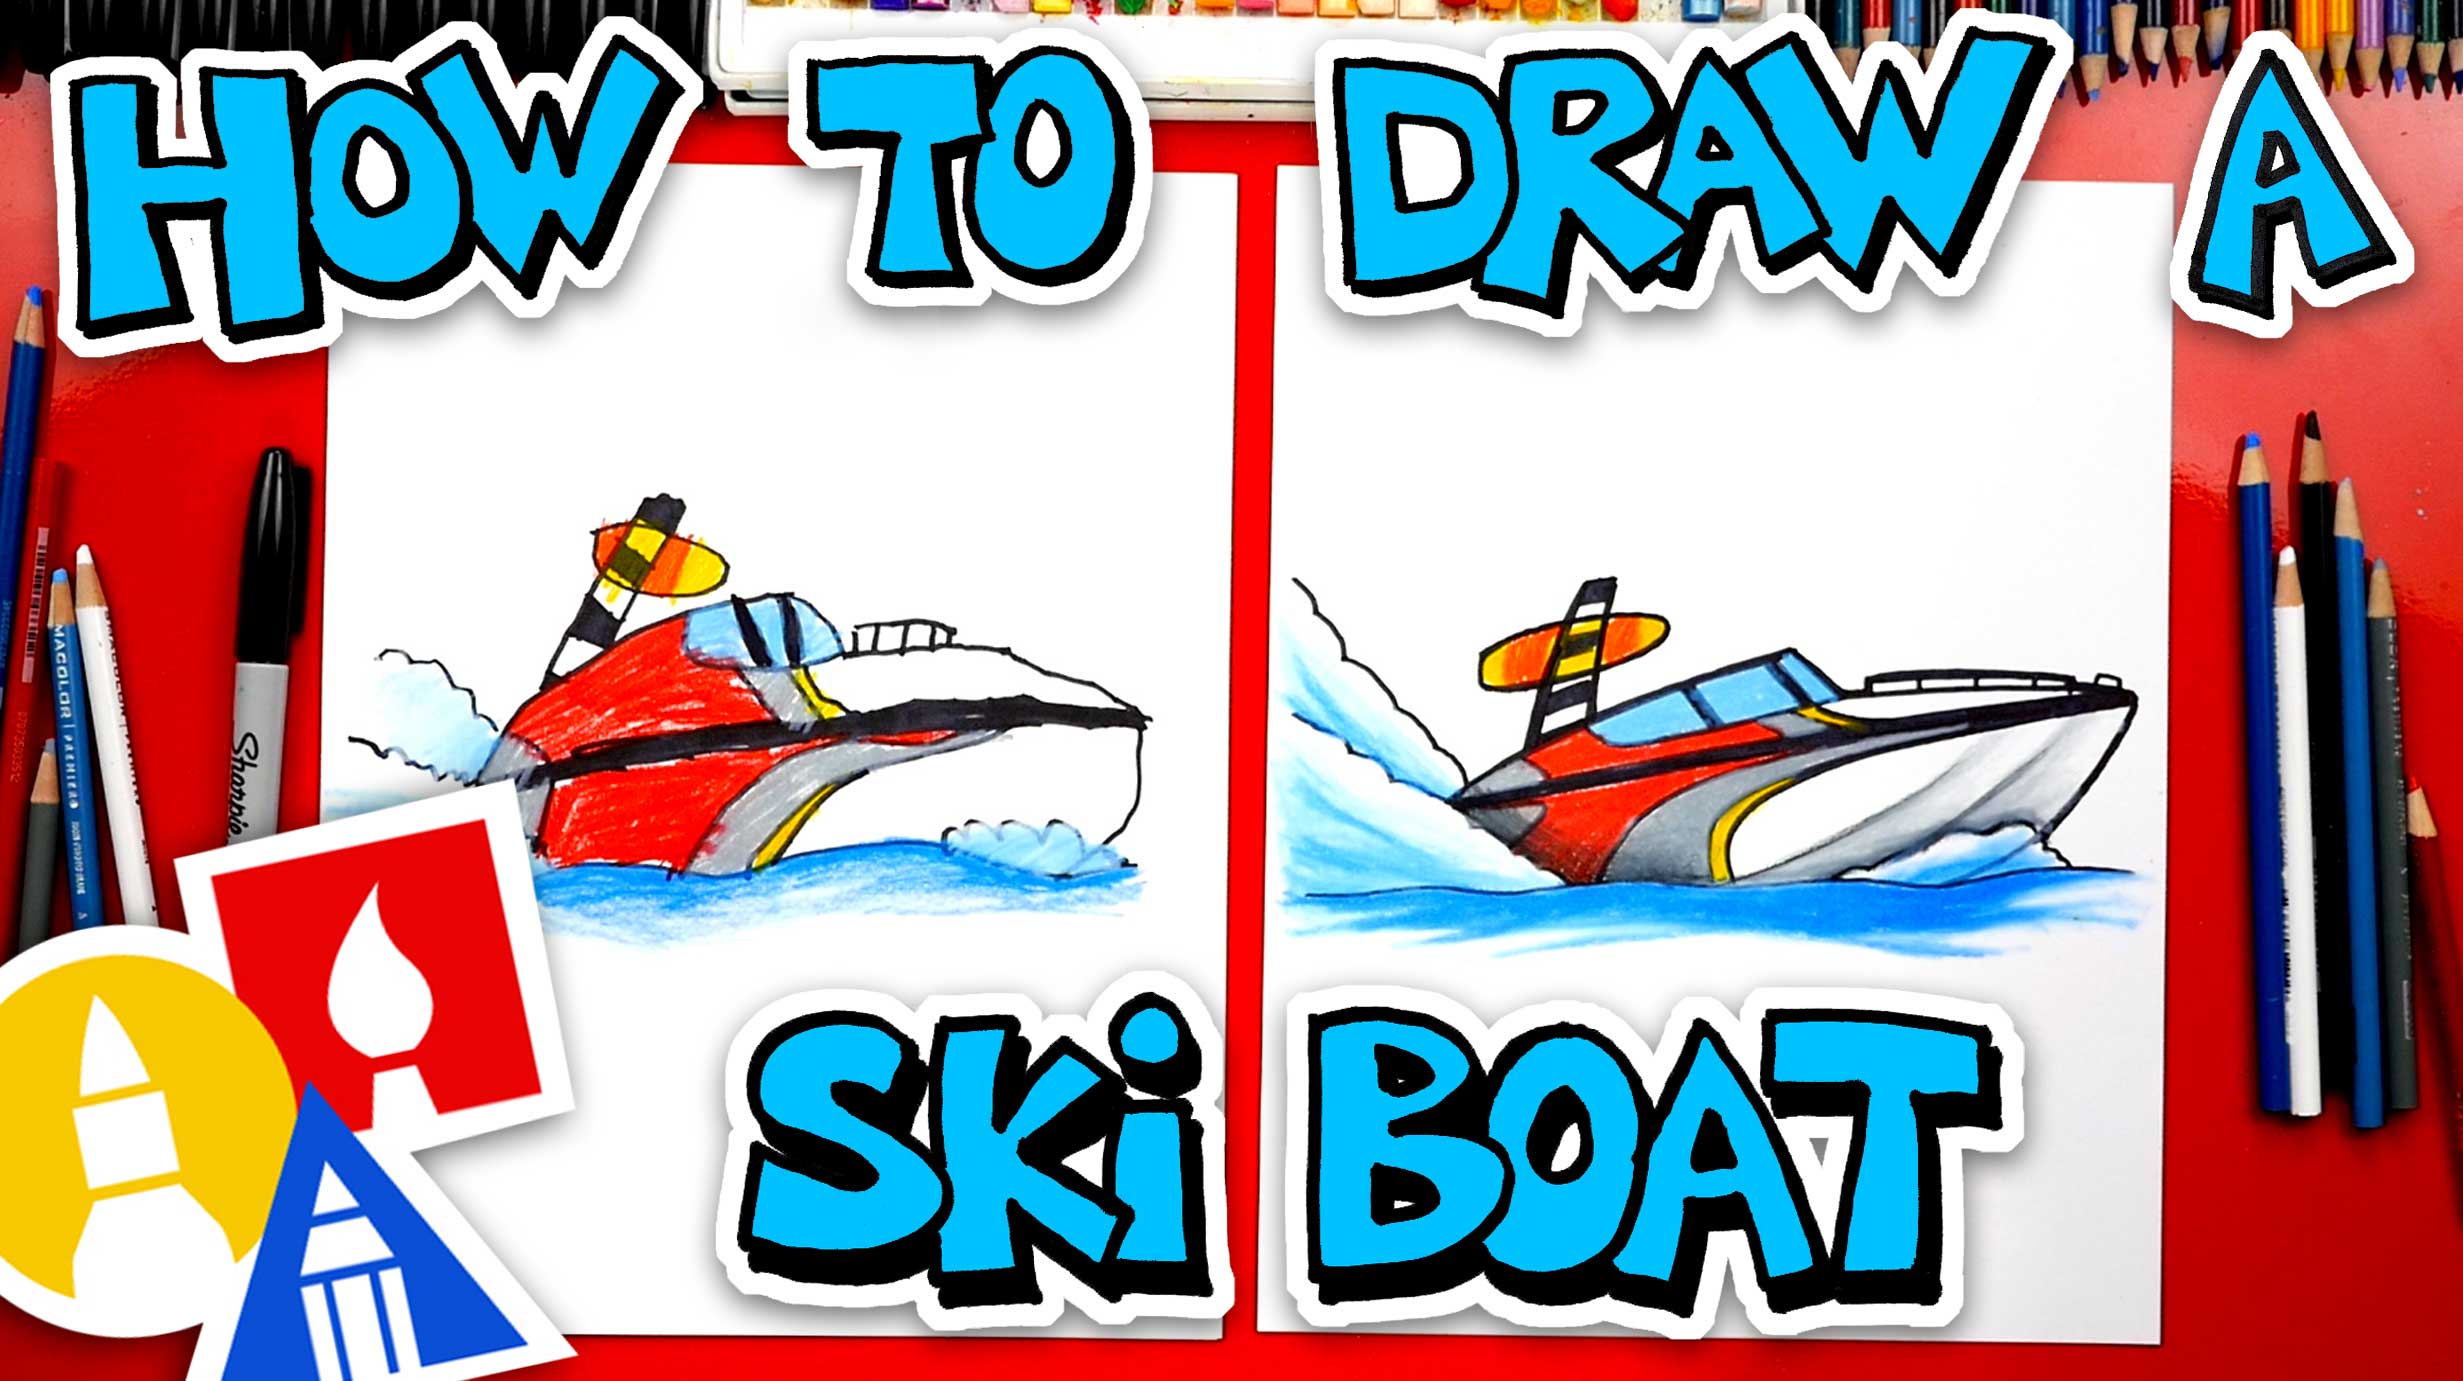 How To Draw A Ski Boat - Art For Kids Hub 